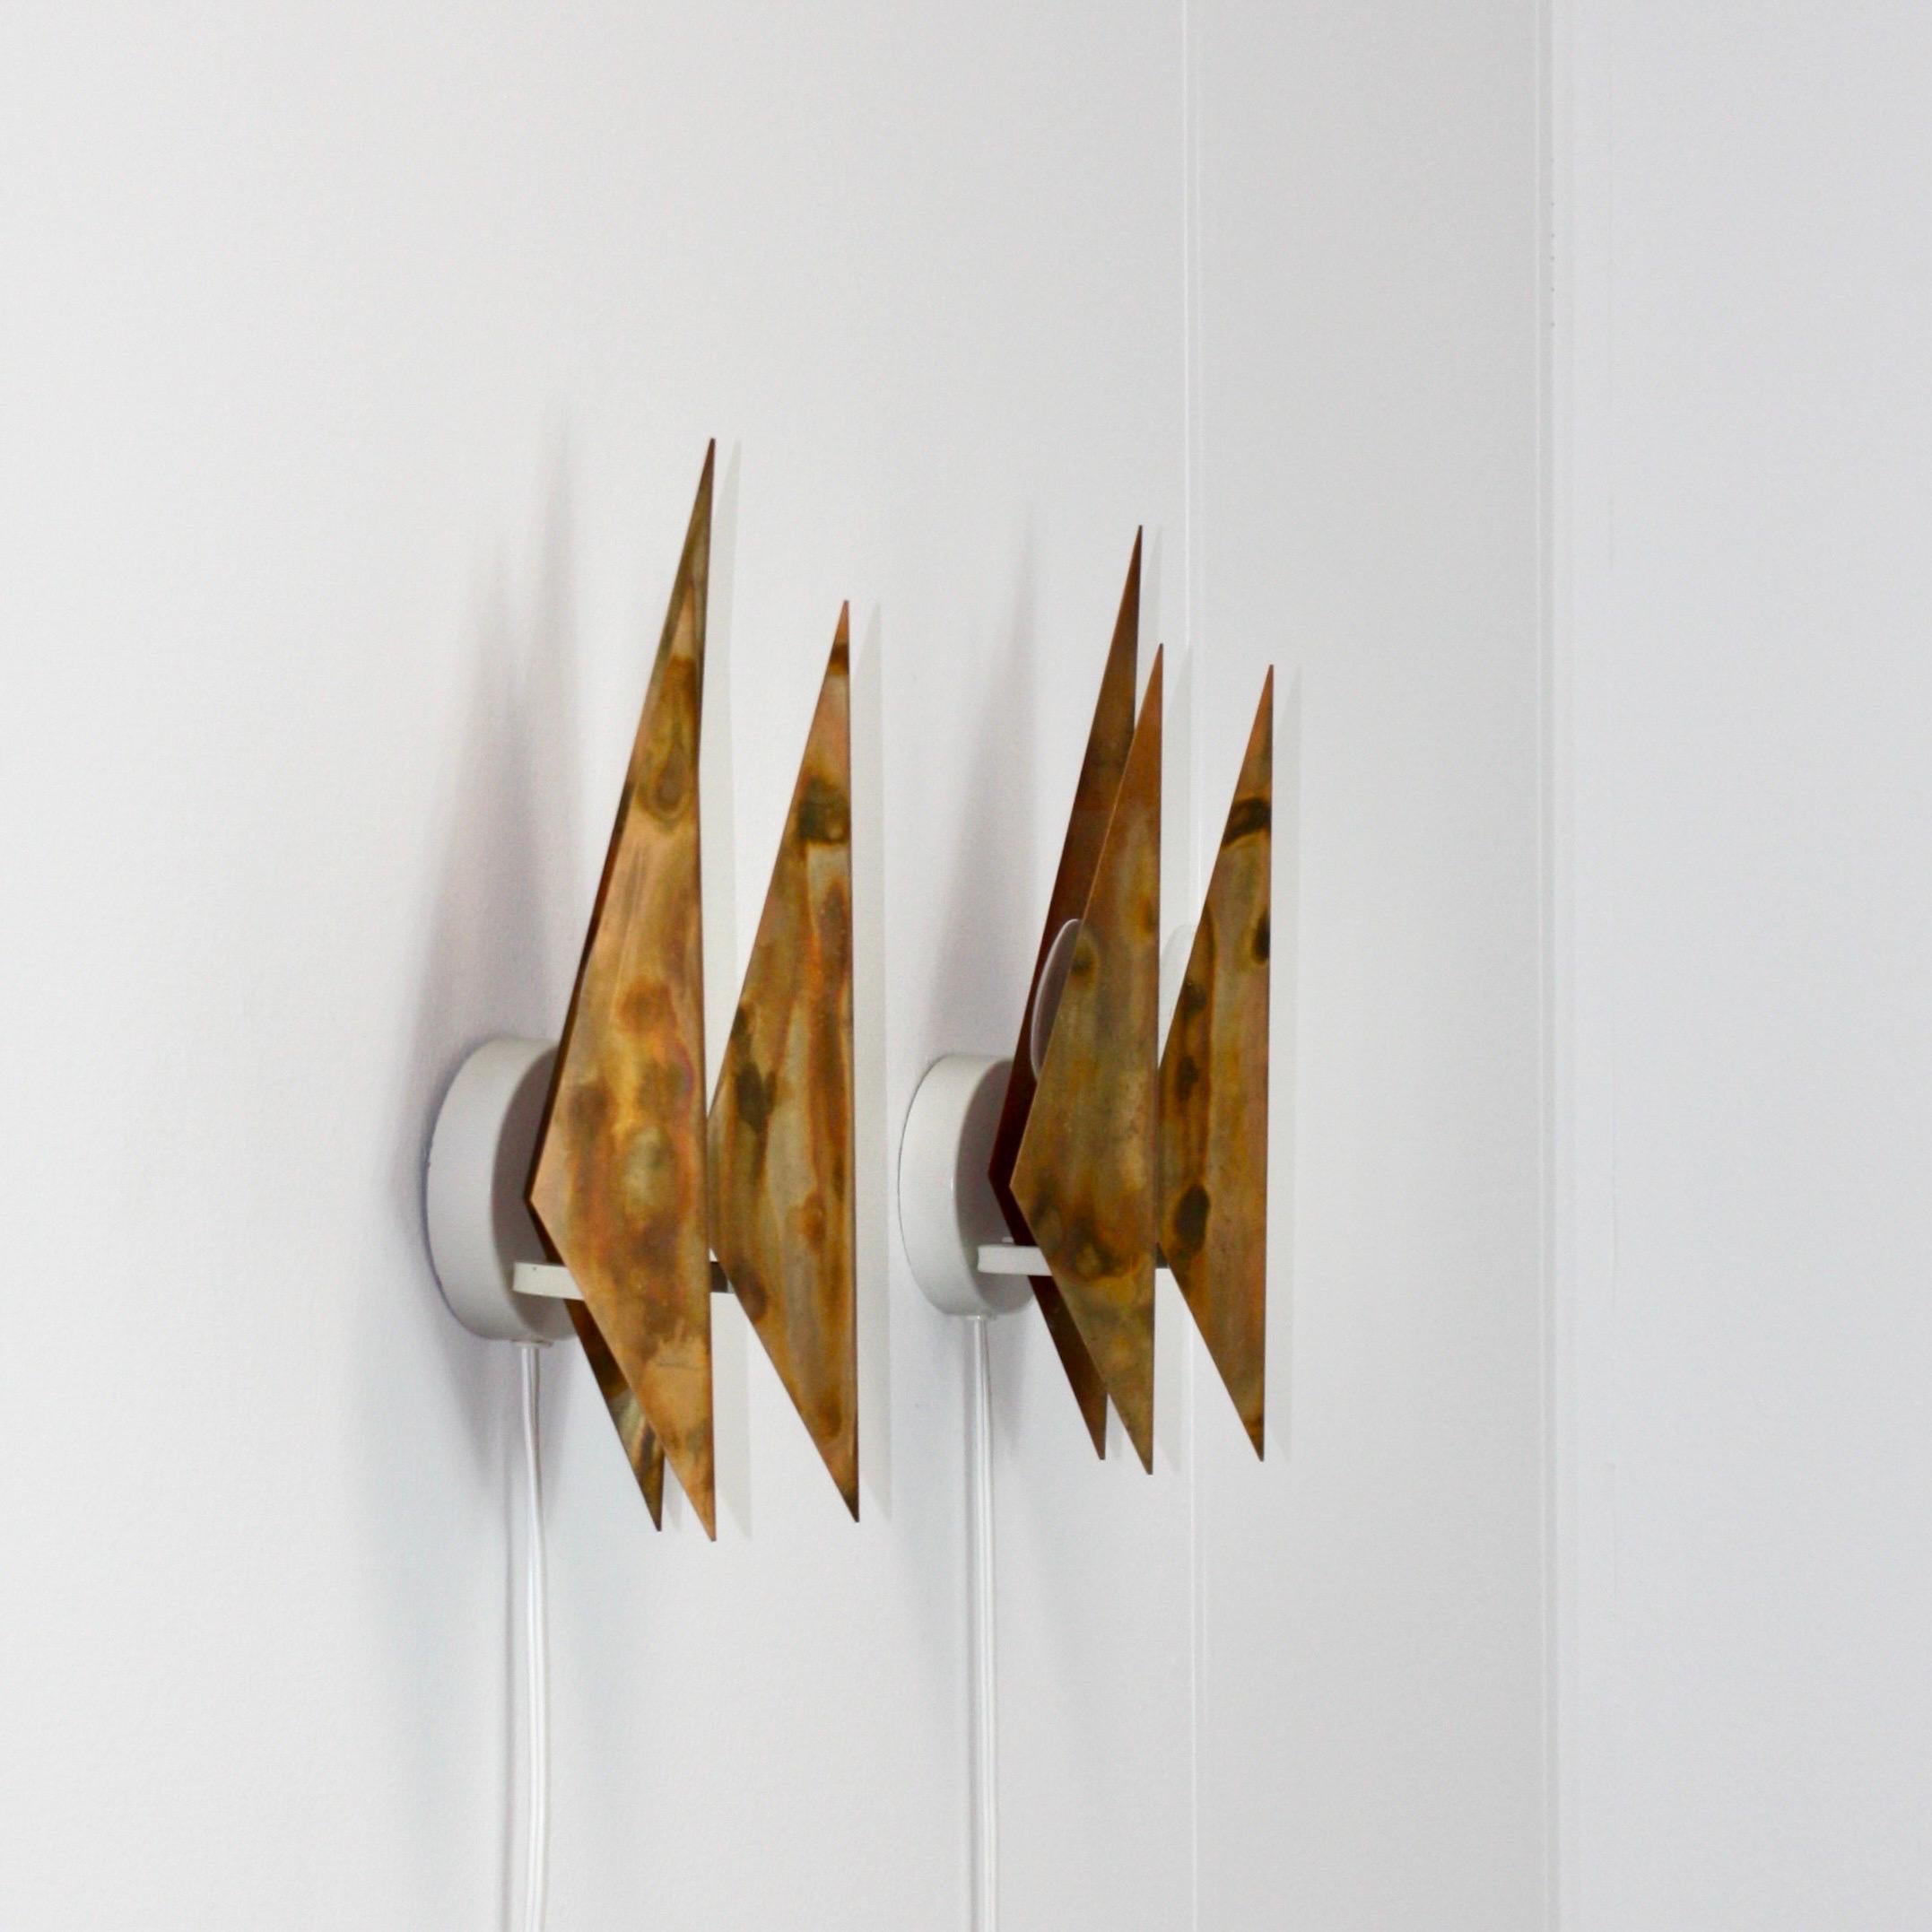 A pair of eye-catching Copper wall lamps with diamond-shaped leafs designed by Svend Aage Holm Sorensen in the 1960s. A true masterpiece from the design lightning designer.

* A pair (2) sconces with three flame-cut diamond-shaped copper leafs
*